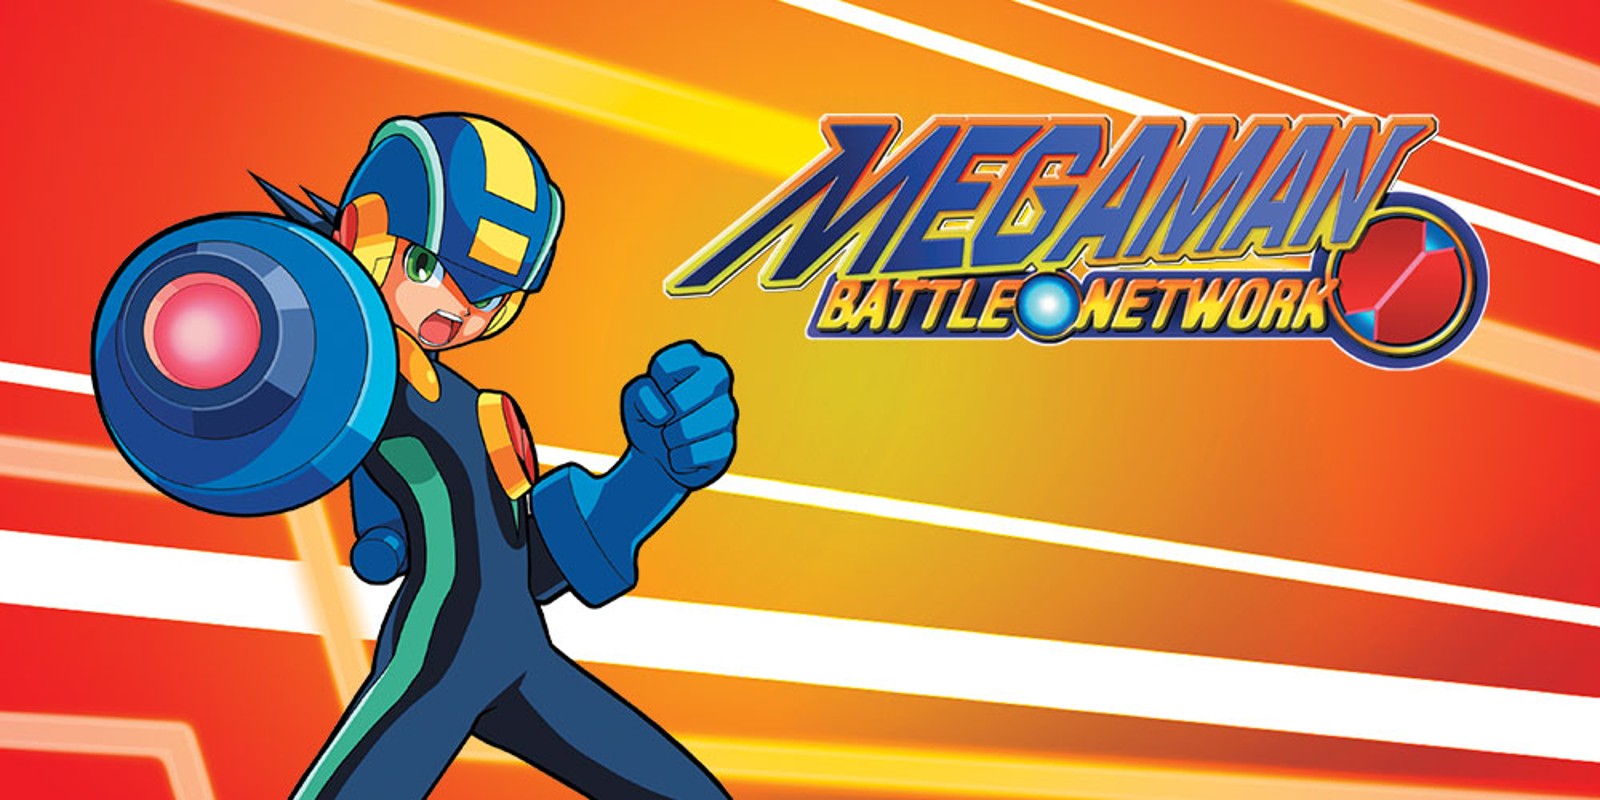 on the possibility of a new Mega Man Battle Network